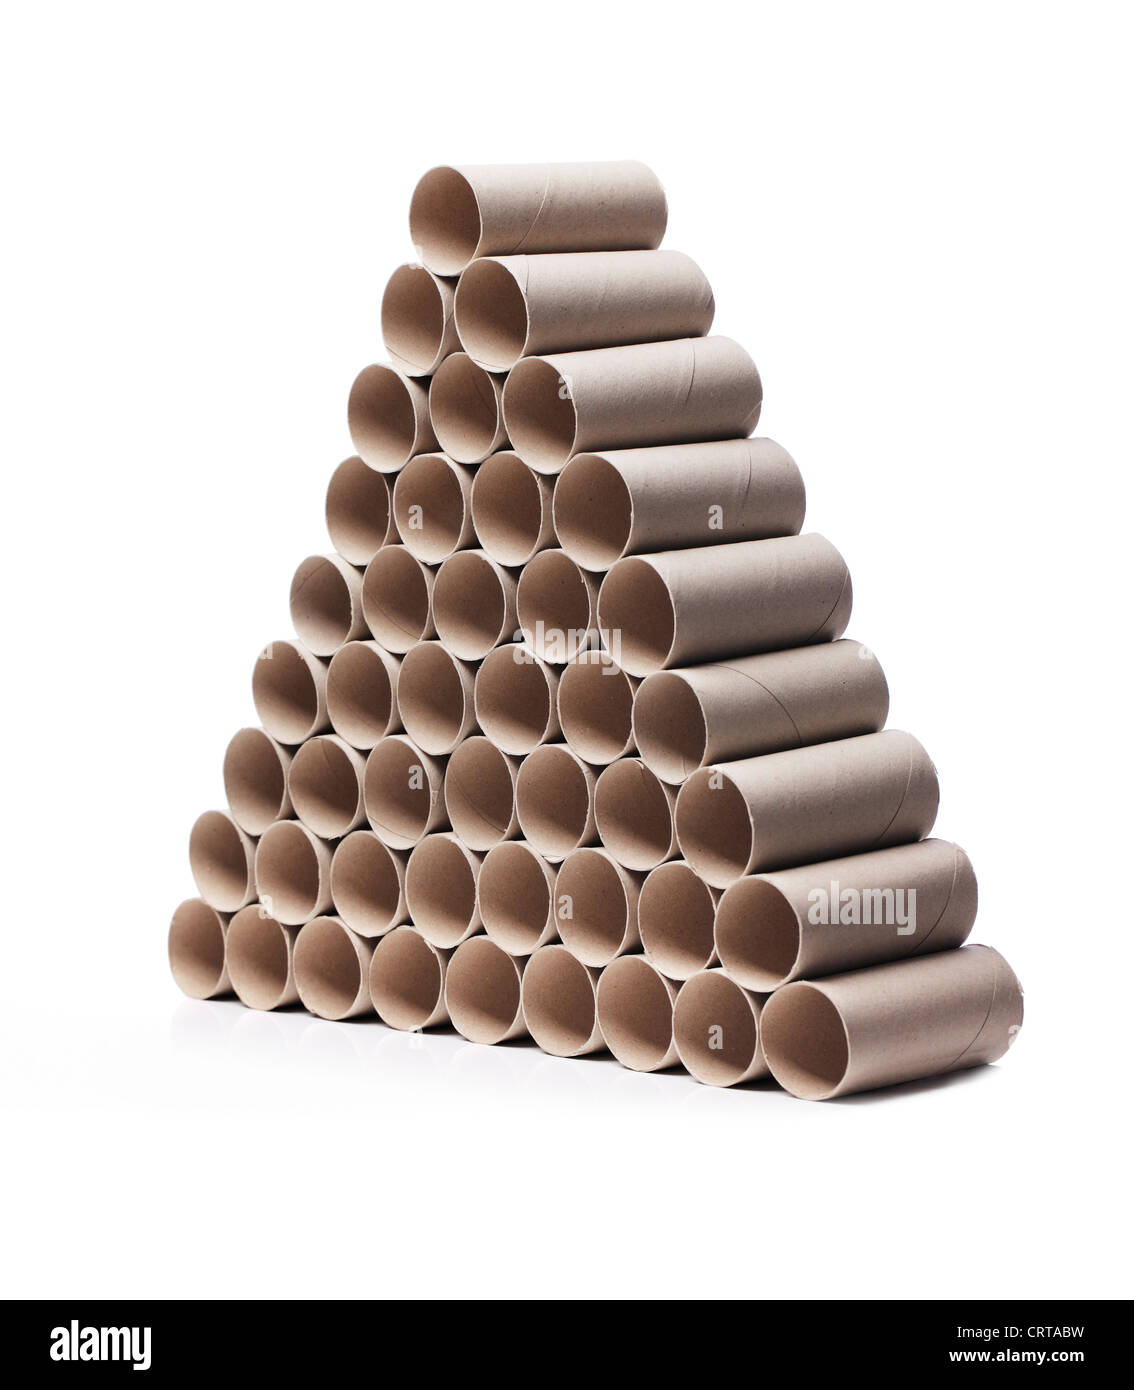 Used toilet paper cardboard rolls stacked in a triangular fashion. Stock Photo